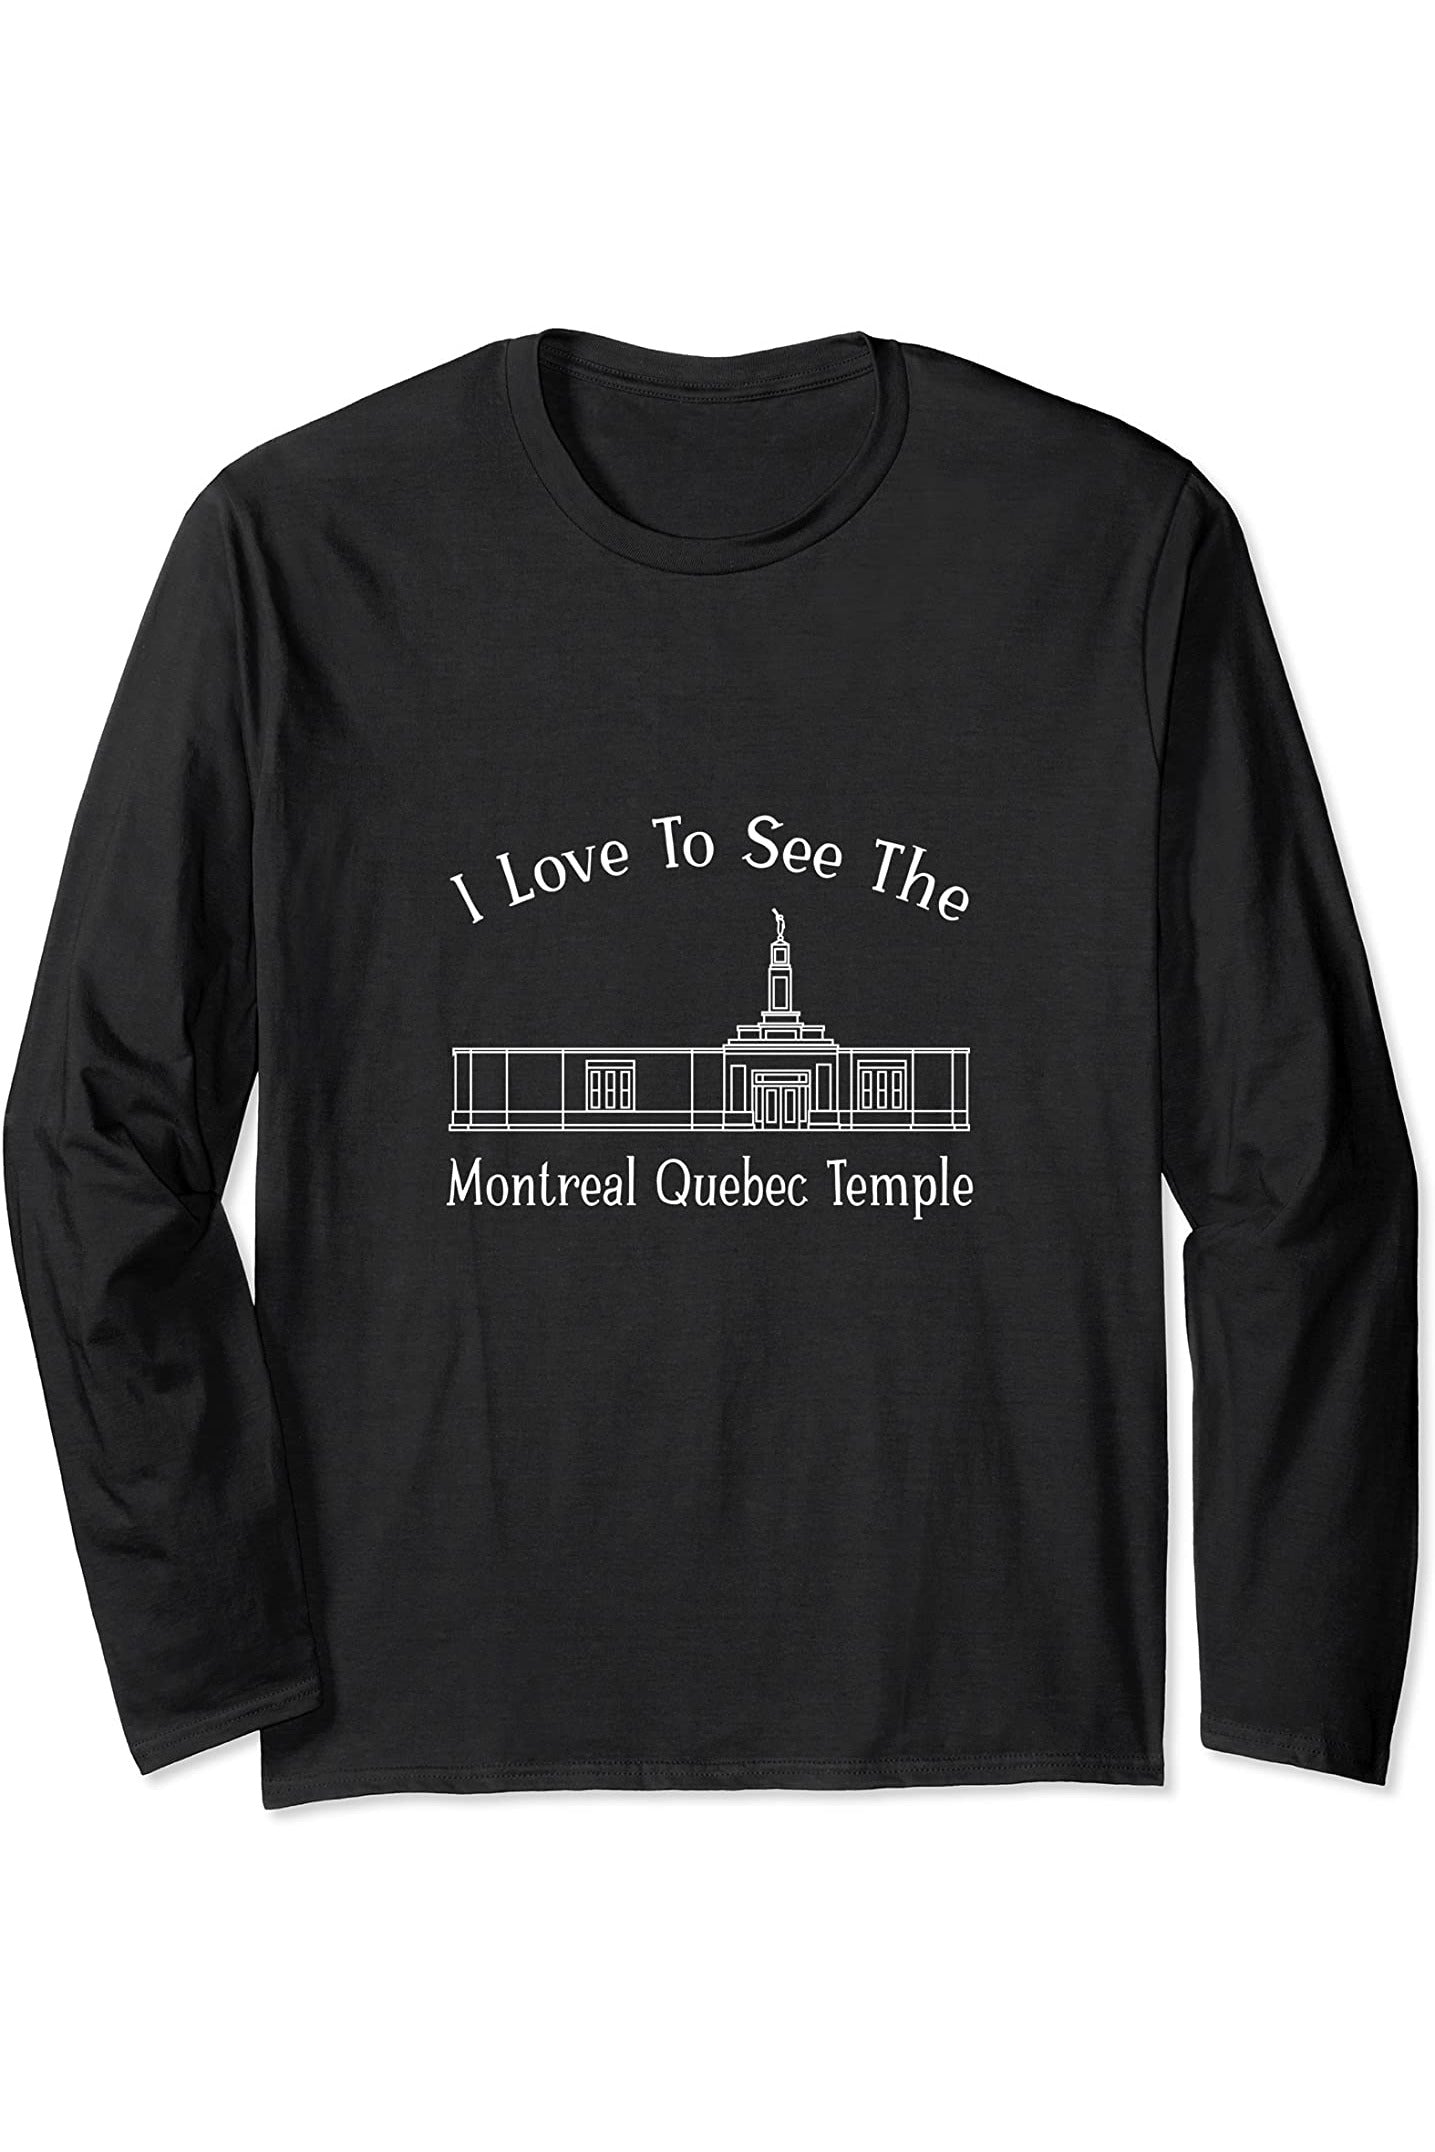 Montreal Quebec Temple Long Sleeve T-Shirt - Happy Style (English) US